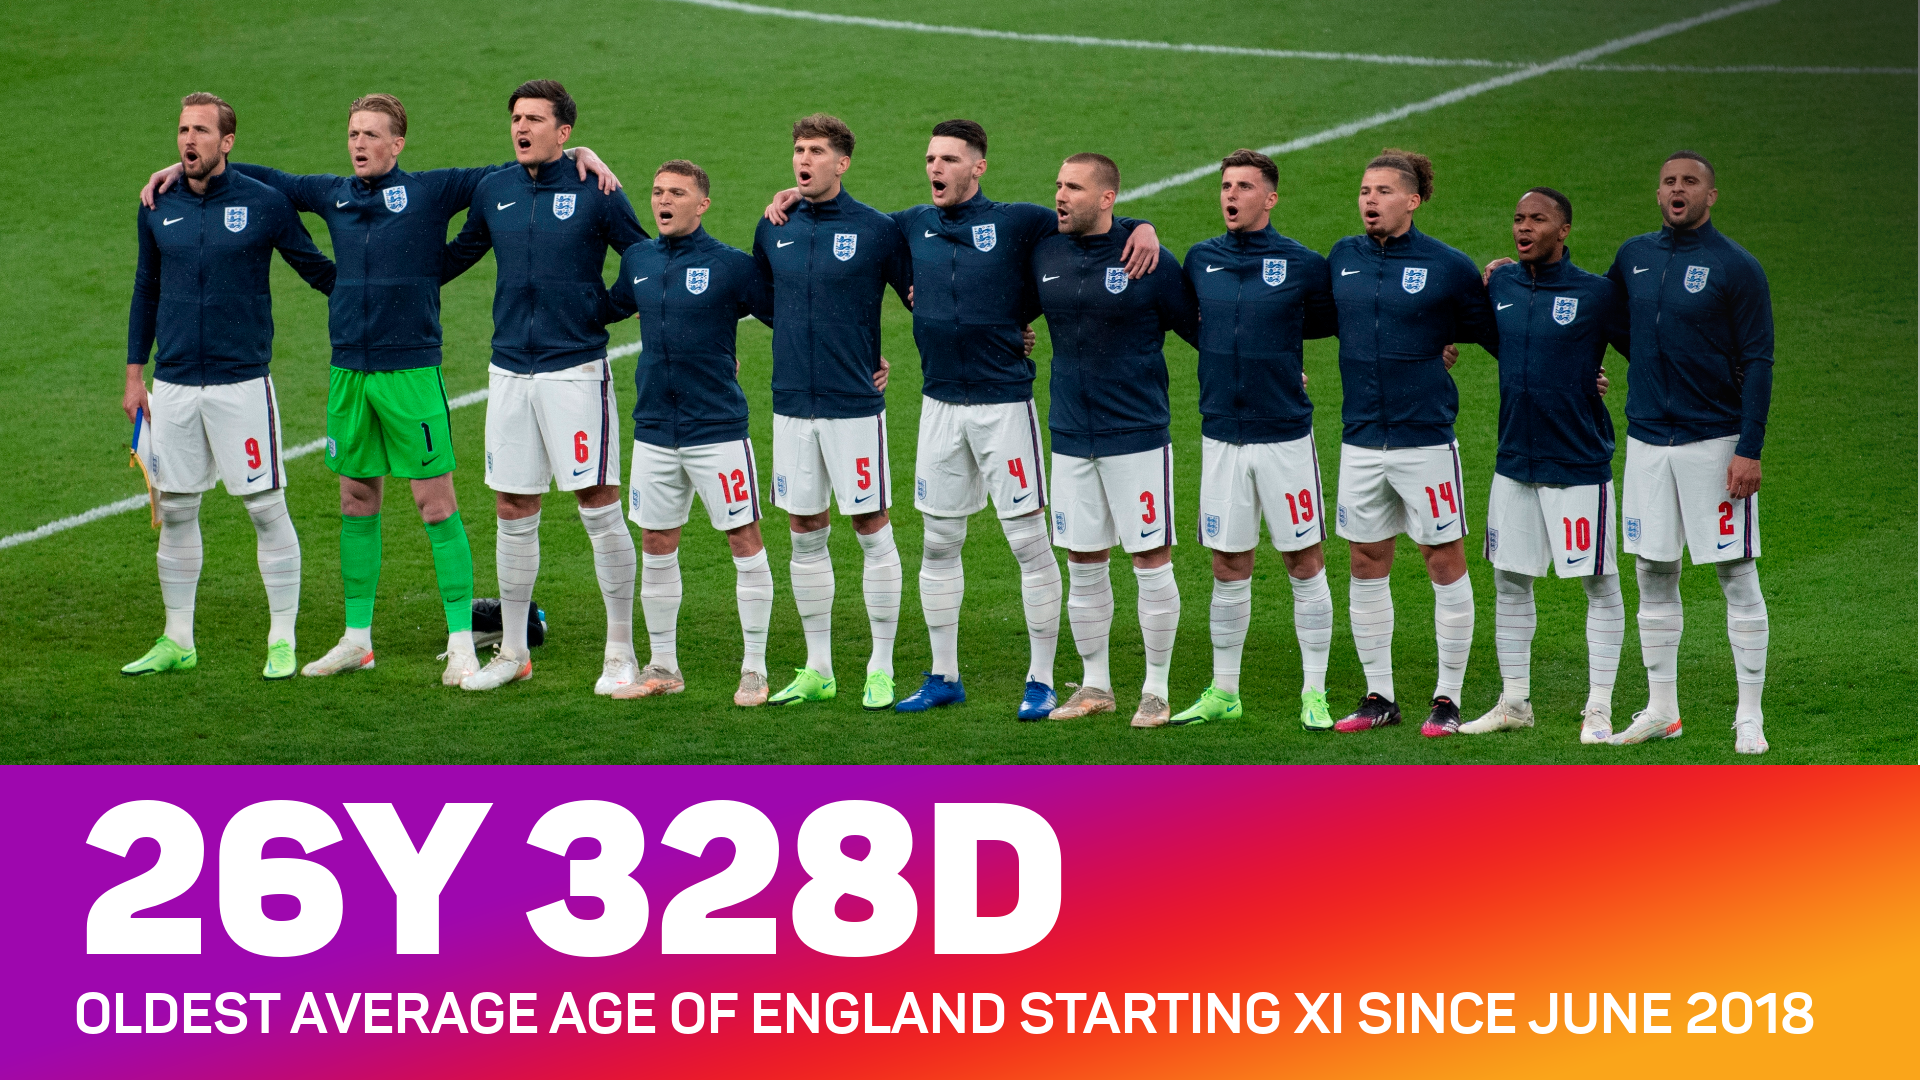 England's starting XI vs Italy in Euro 2020 was their oldest starting XI since before the 2018 World Cup